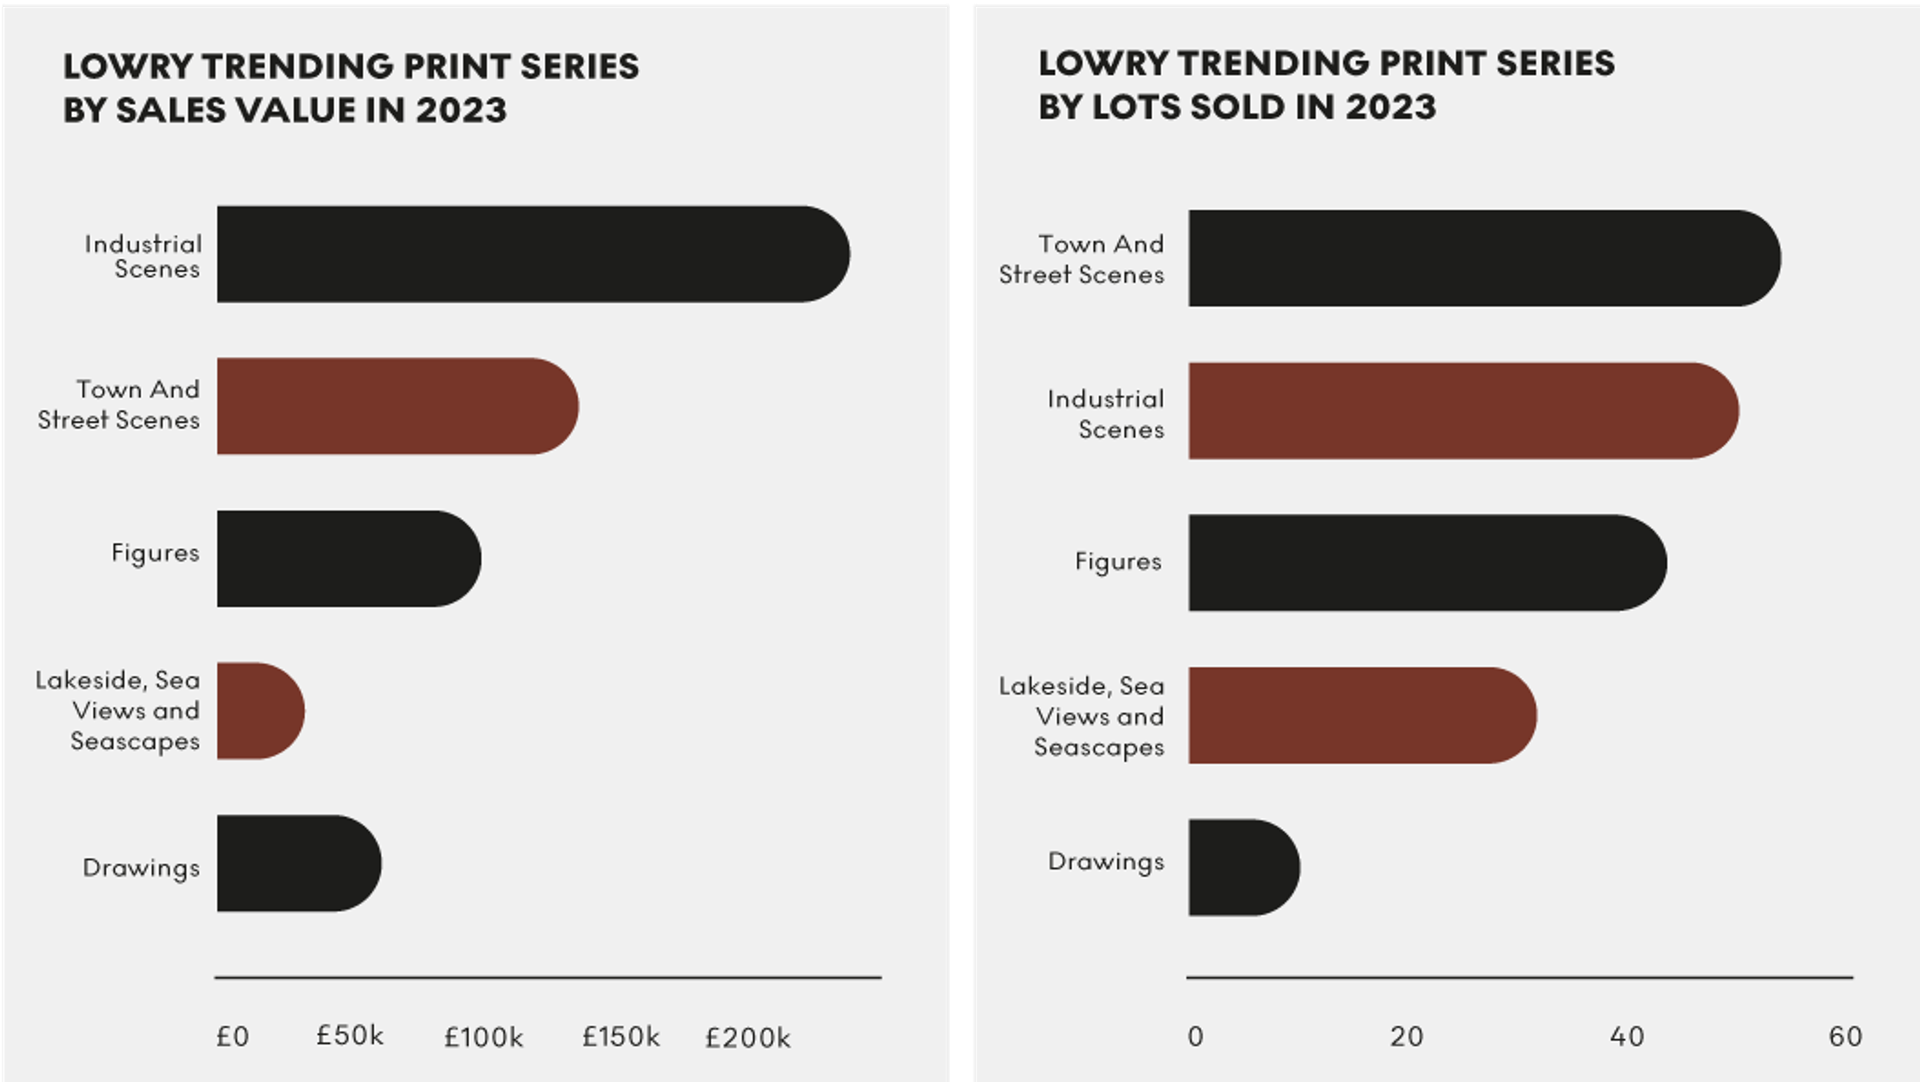 Two horizontal bar graphs illustrating the market dynamics of Lowry's print series by sales value and lots sold in 2023. 